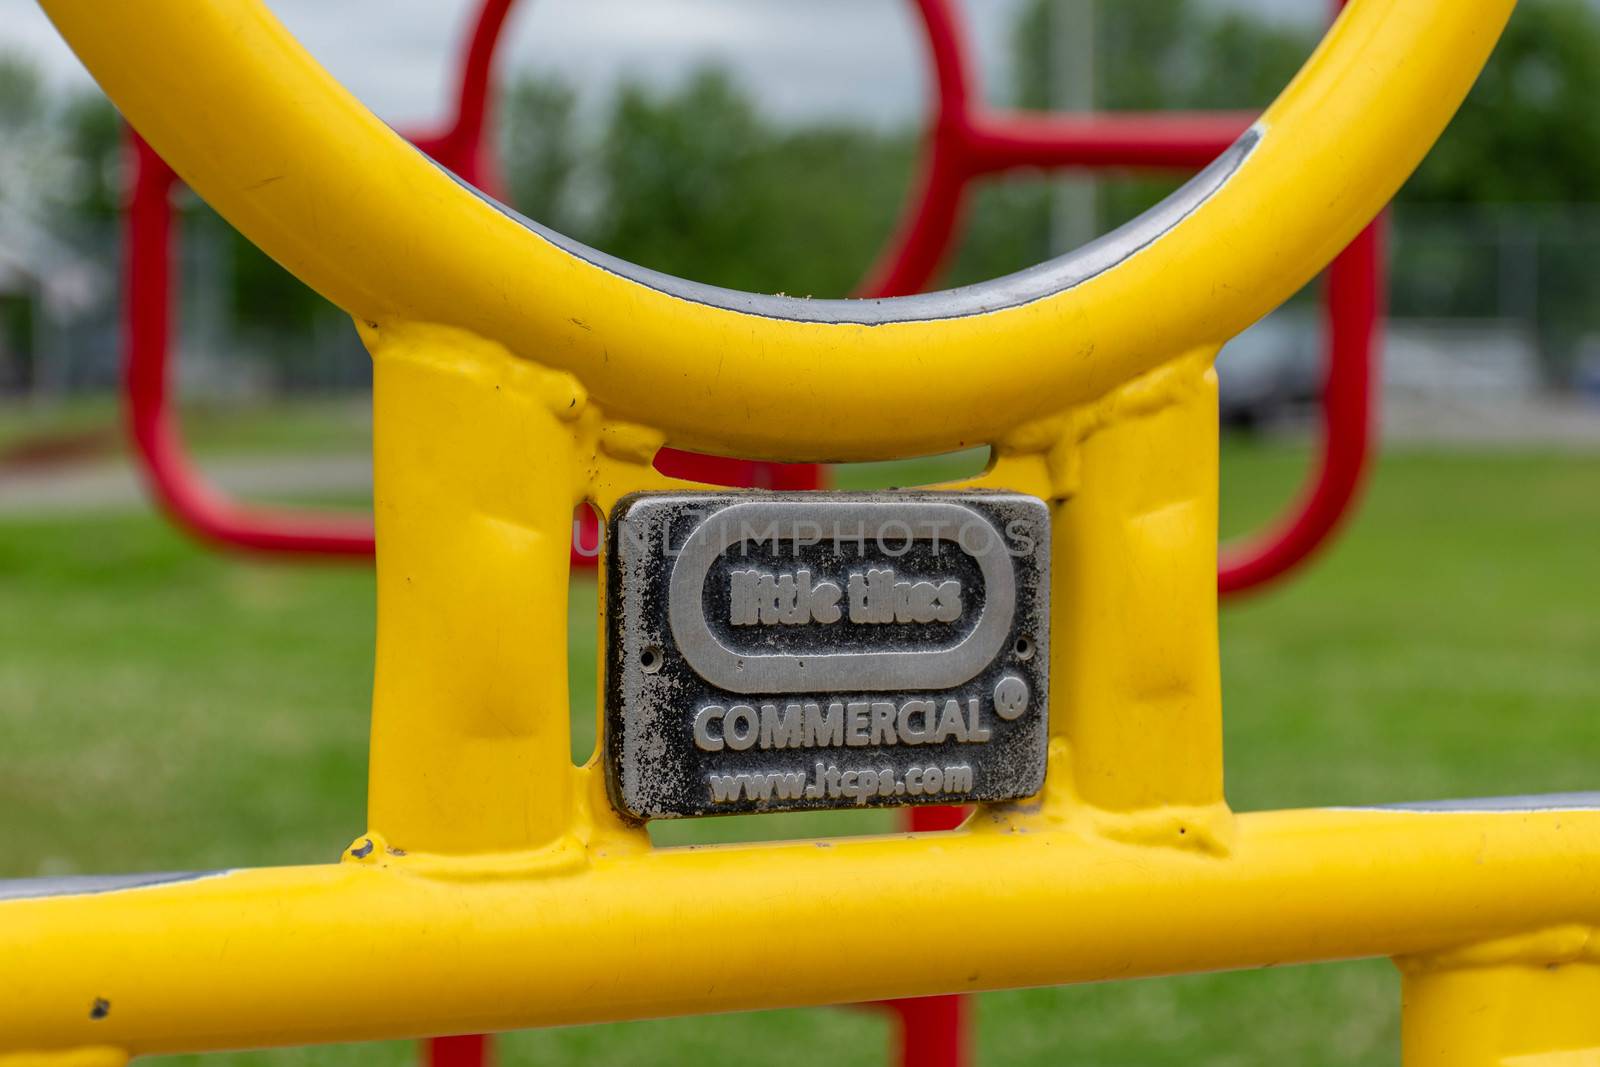 Little tikes commercial logo on bright outdoor playground by kingmaphotos